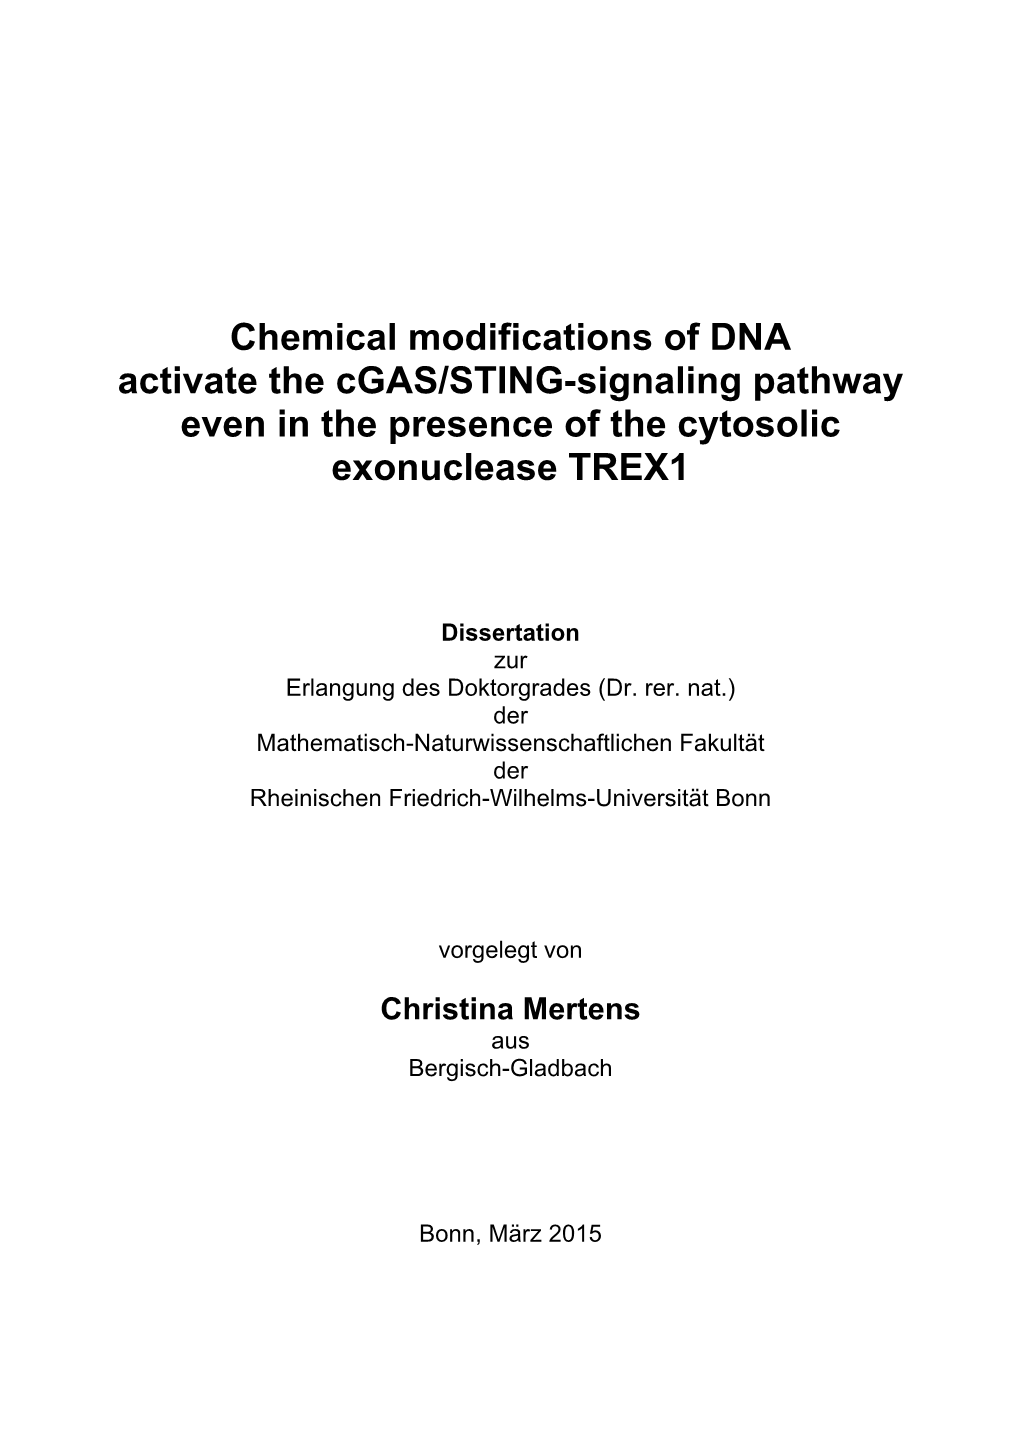 Chemical Modifications of DNA Activate the Cgas/STING-Signaling Pathway Even in the Presence of the Cytosolic Exonuclease TREX1